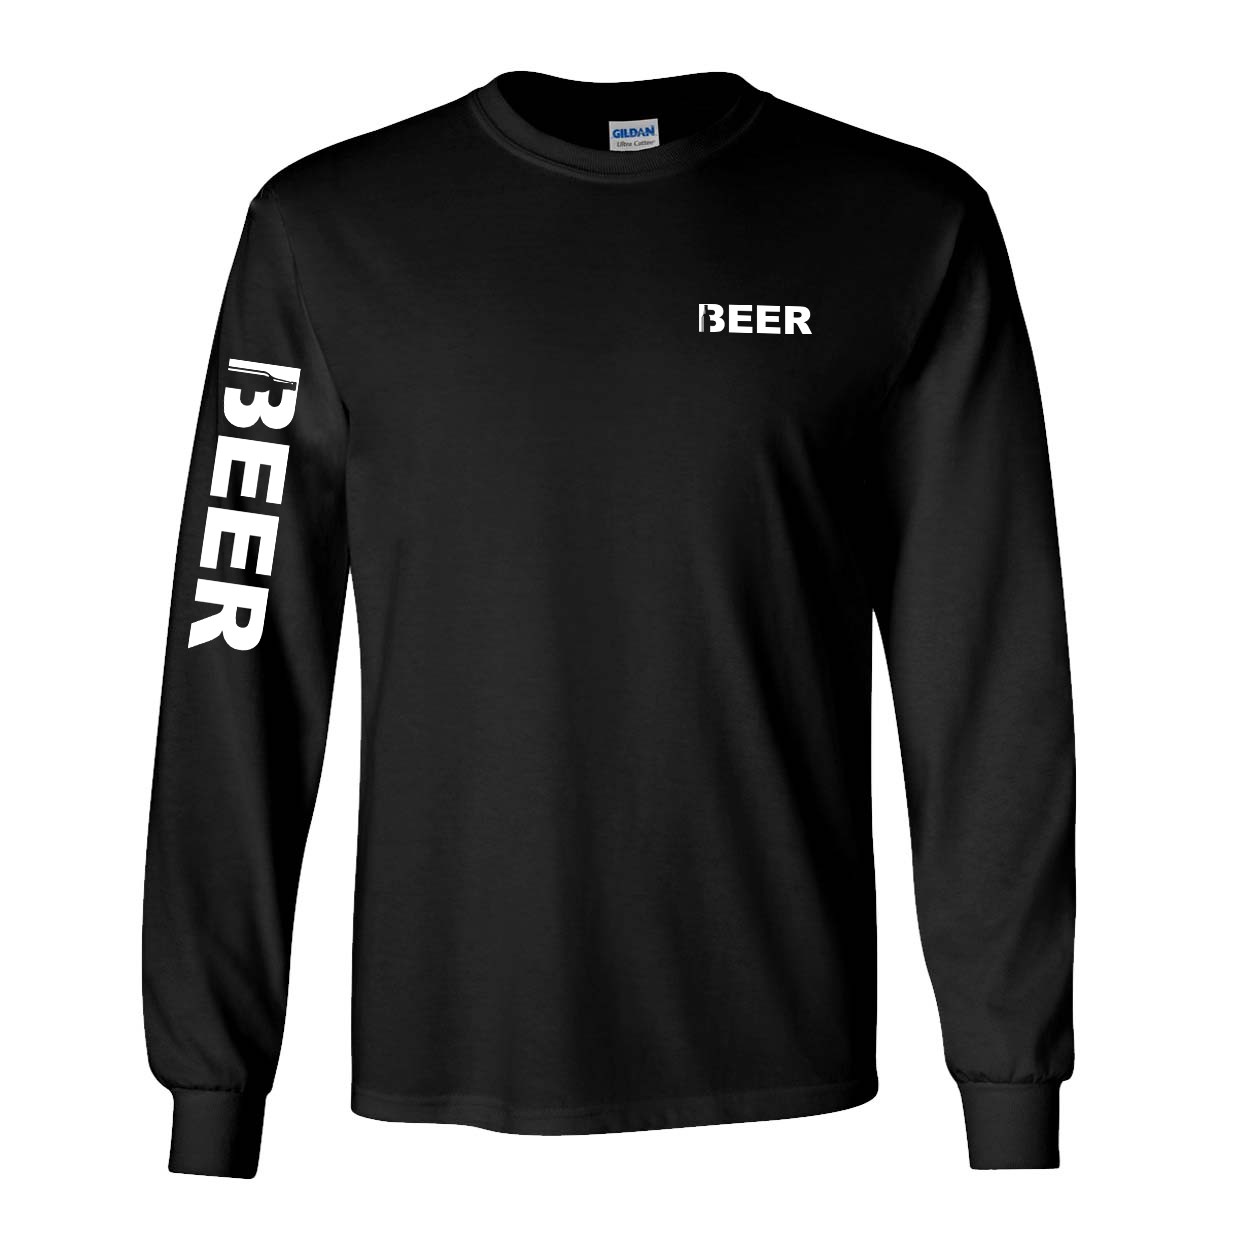 Beer Bottle Logo Night Out Long Sleeve T-Shirt with Arm Logo Black